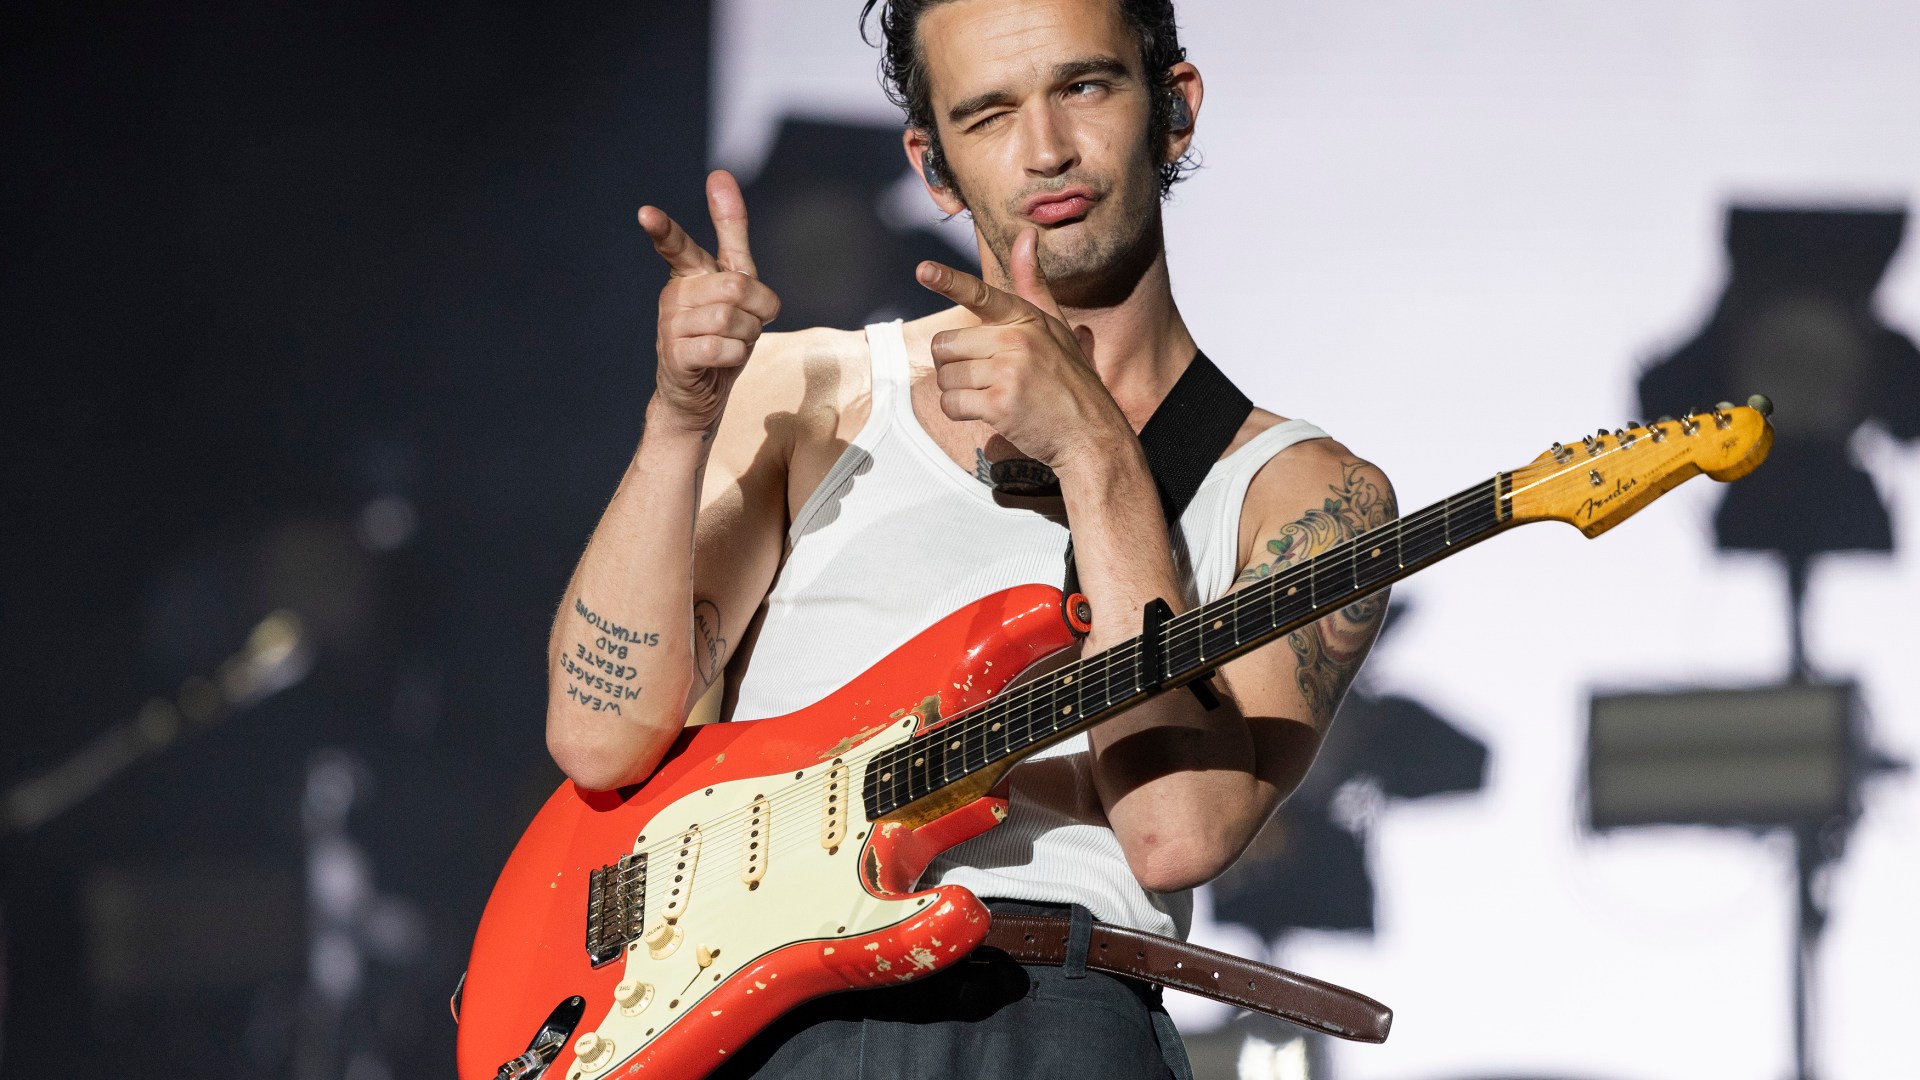 Matty Healy Speaks Out: Ex Taylor Swift Labels Him ‘Smallest Man in the World'” – SEO title for ranking purposes, includes keywords “Matty Healy,” “Taylor Swift,” “Ex,” “Song,” “Smallest Man in the World